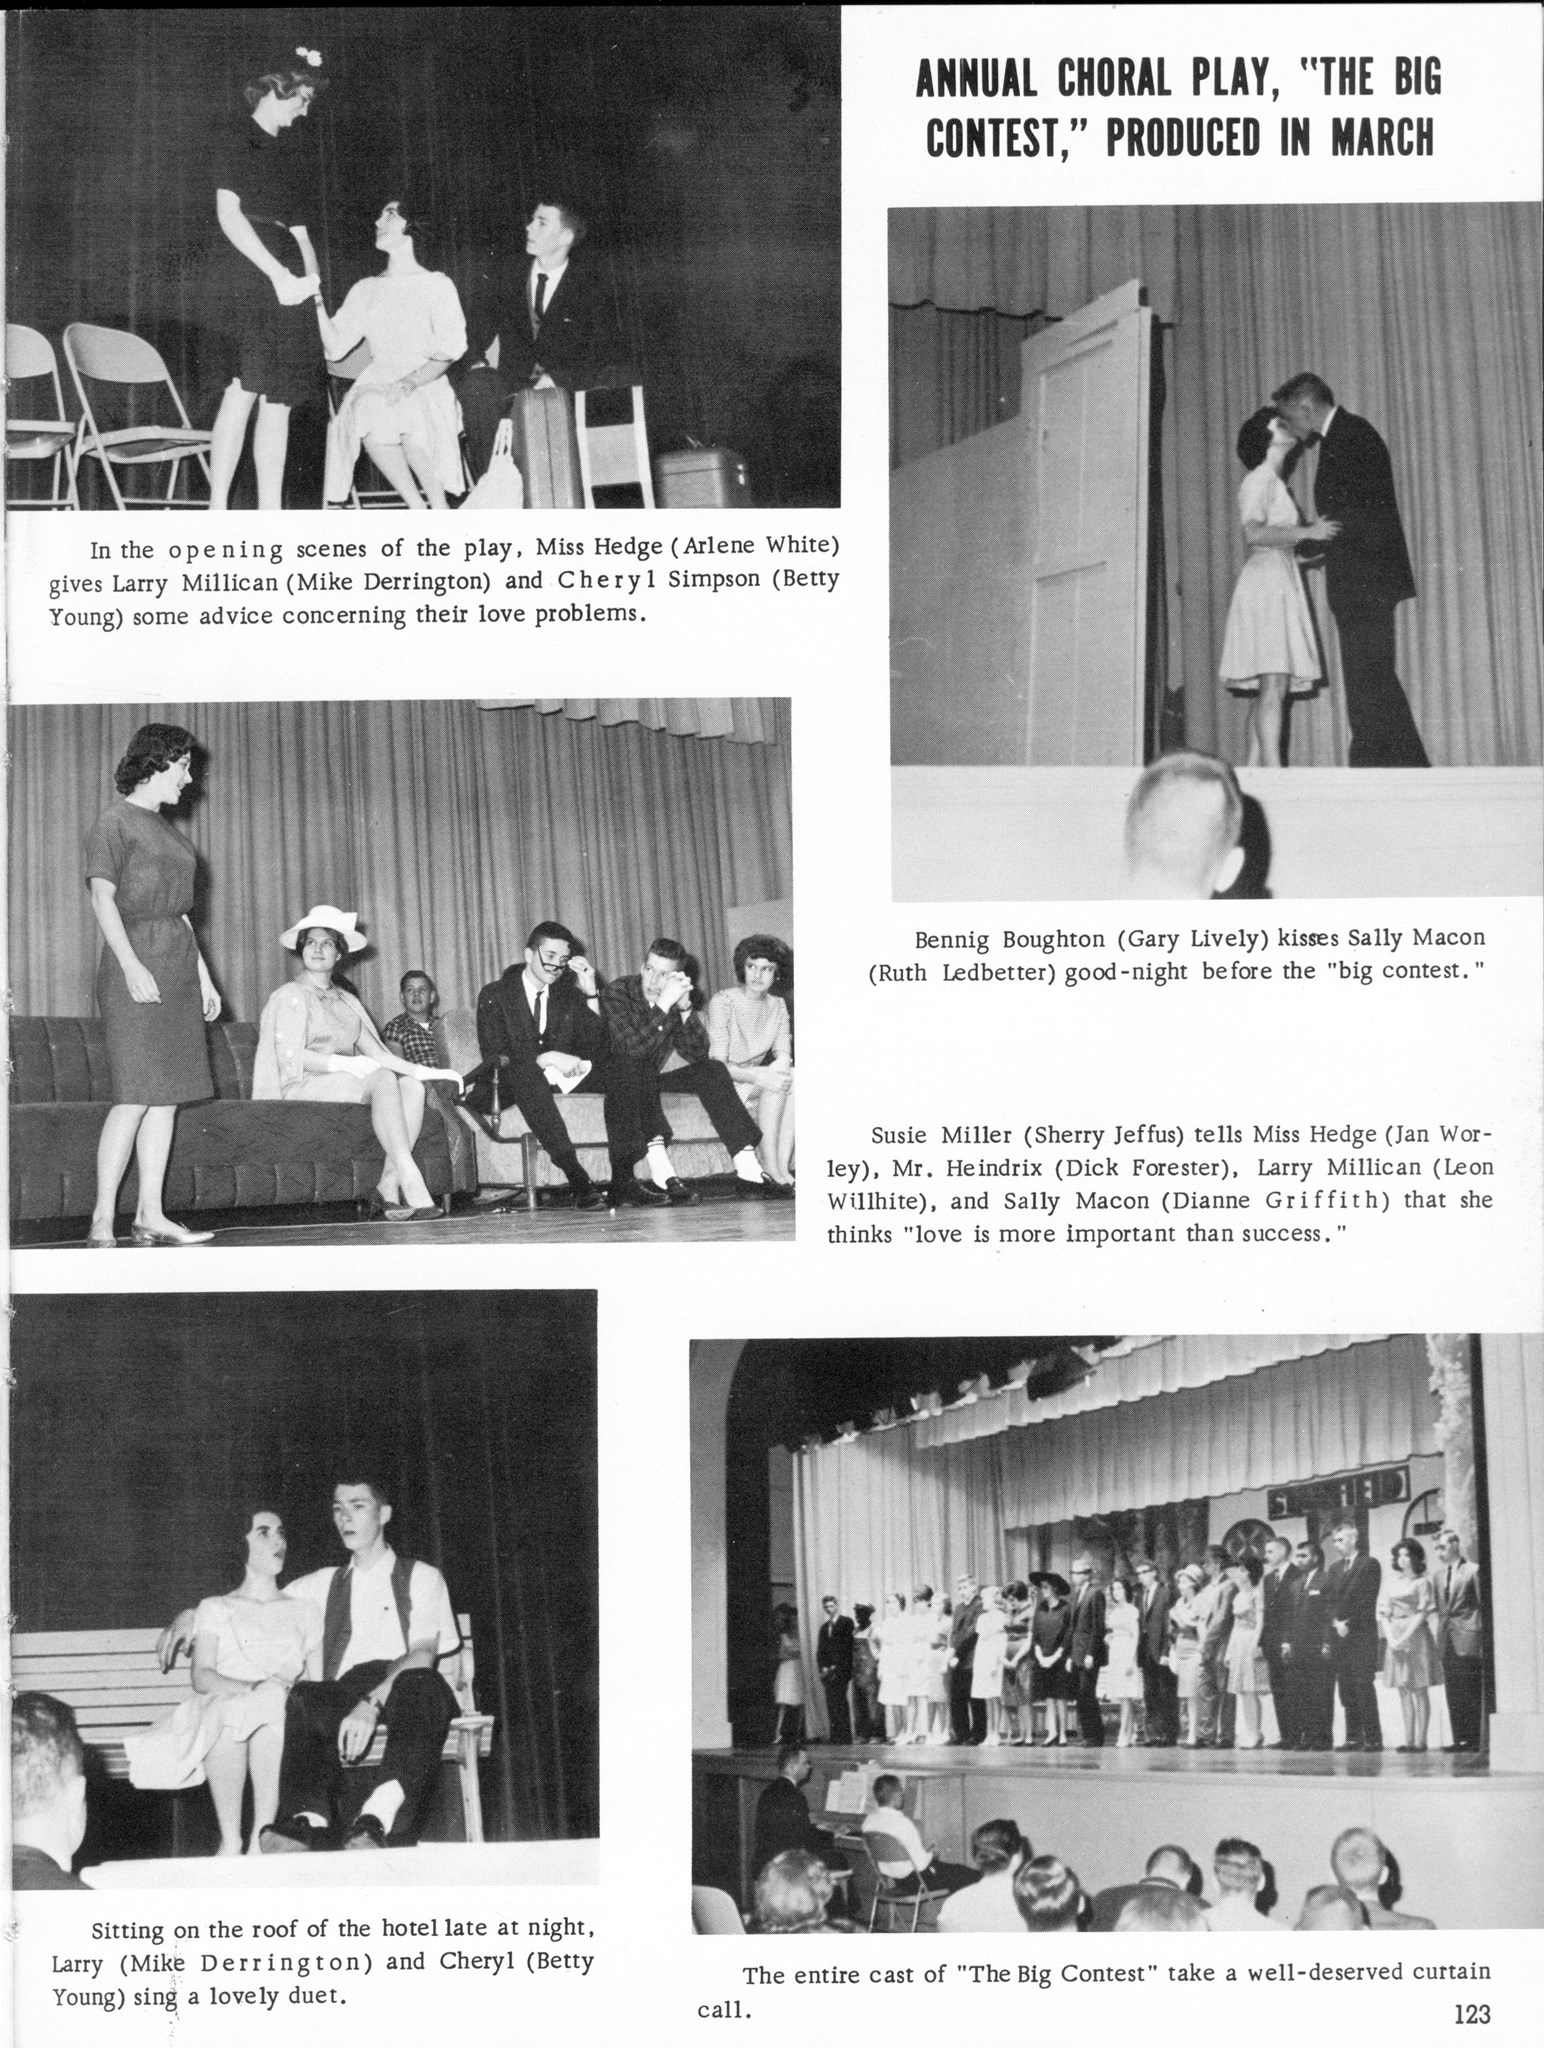 ../../../Images/Large/1963/Arclight-1963-pg0123.jpg